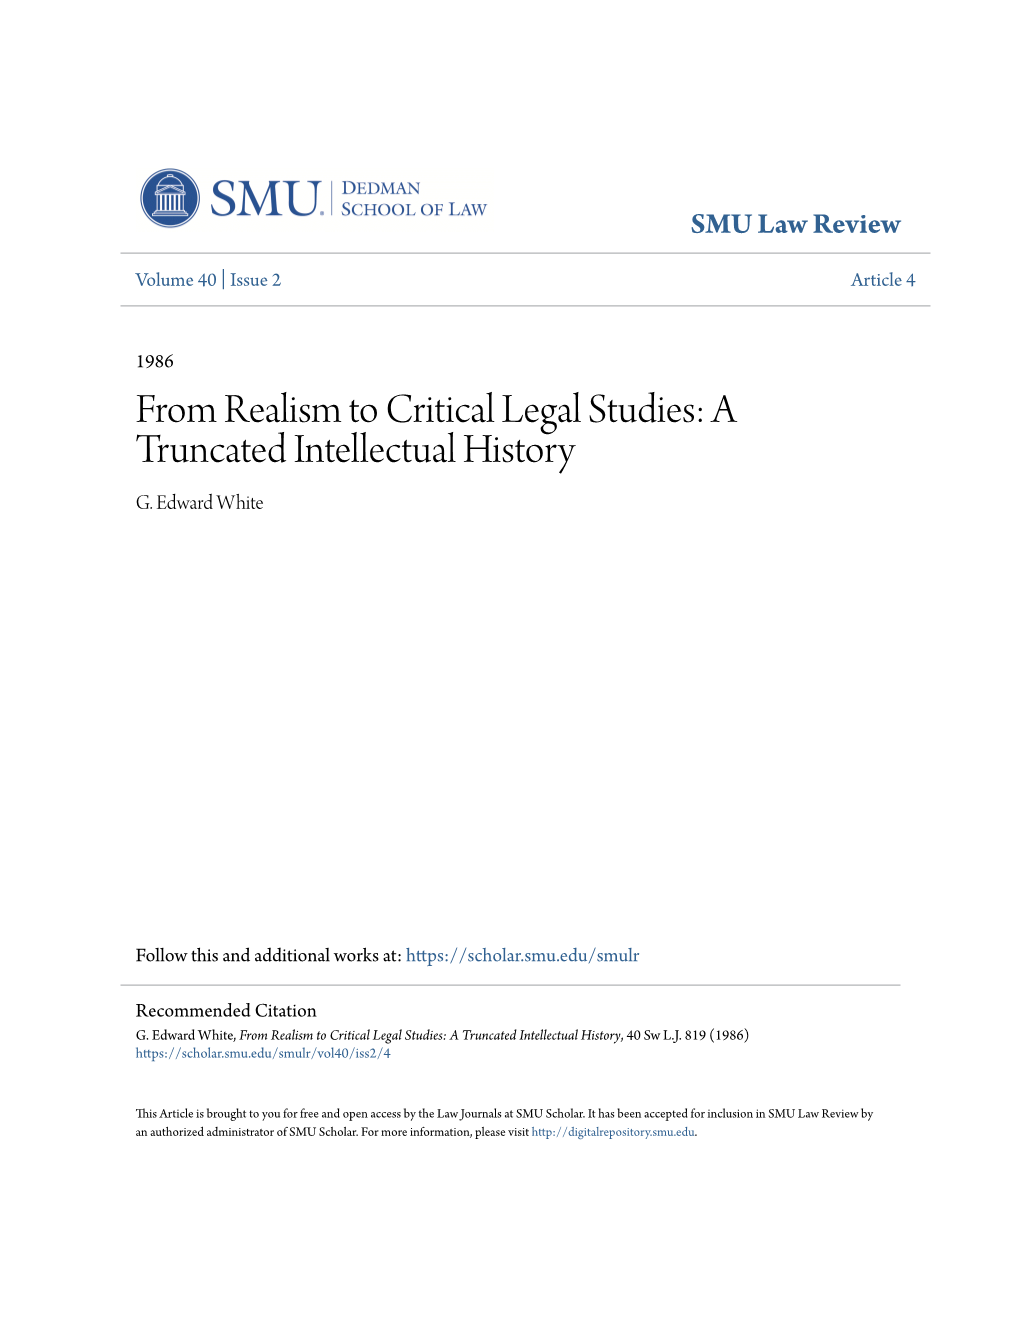 From Realism to Critical Legal Studies: a Truncated Intellectual History G